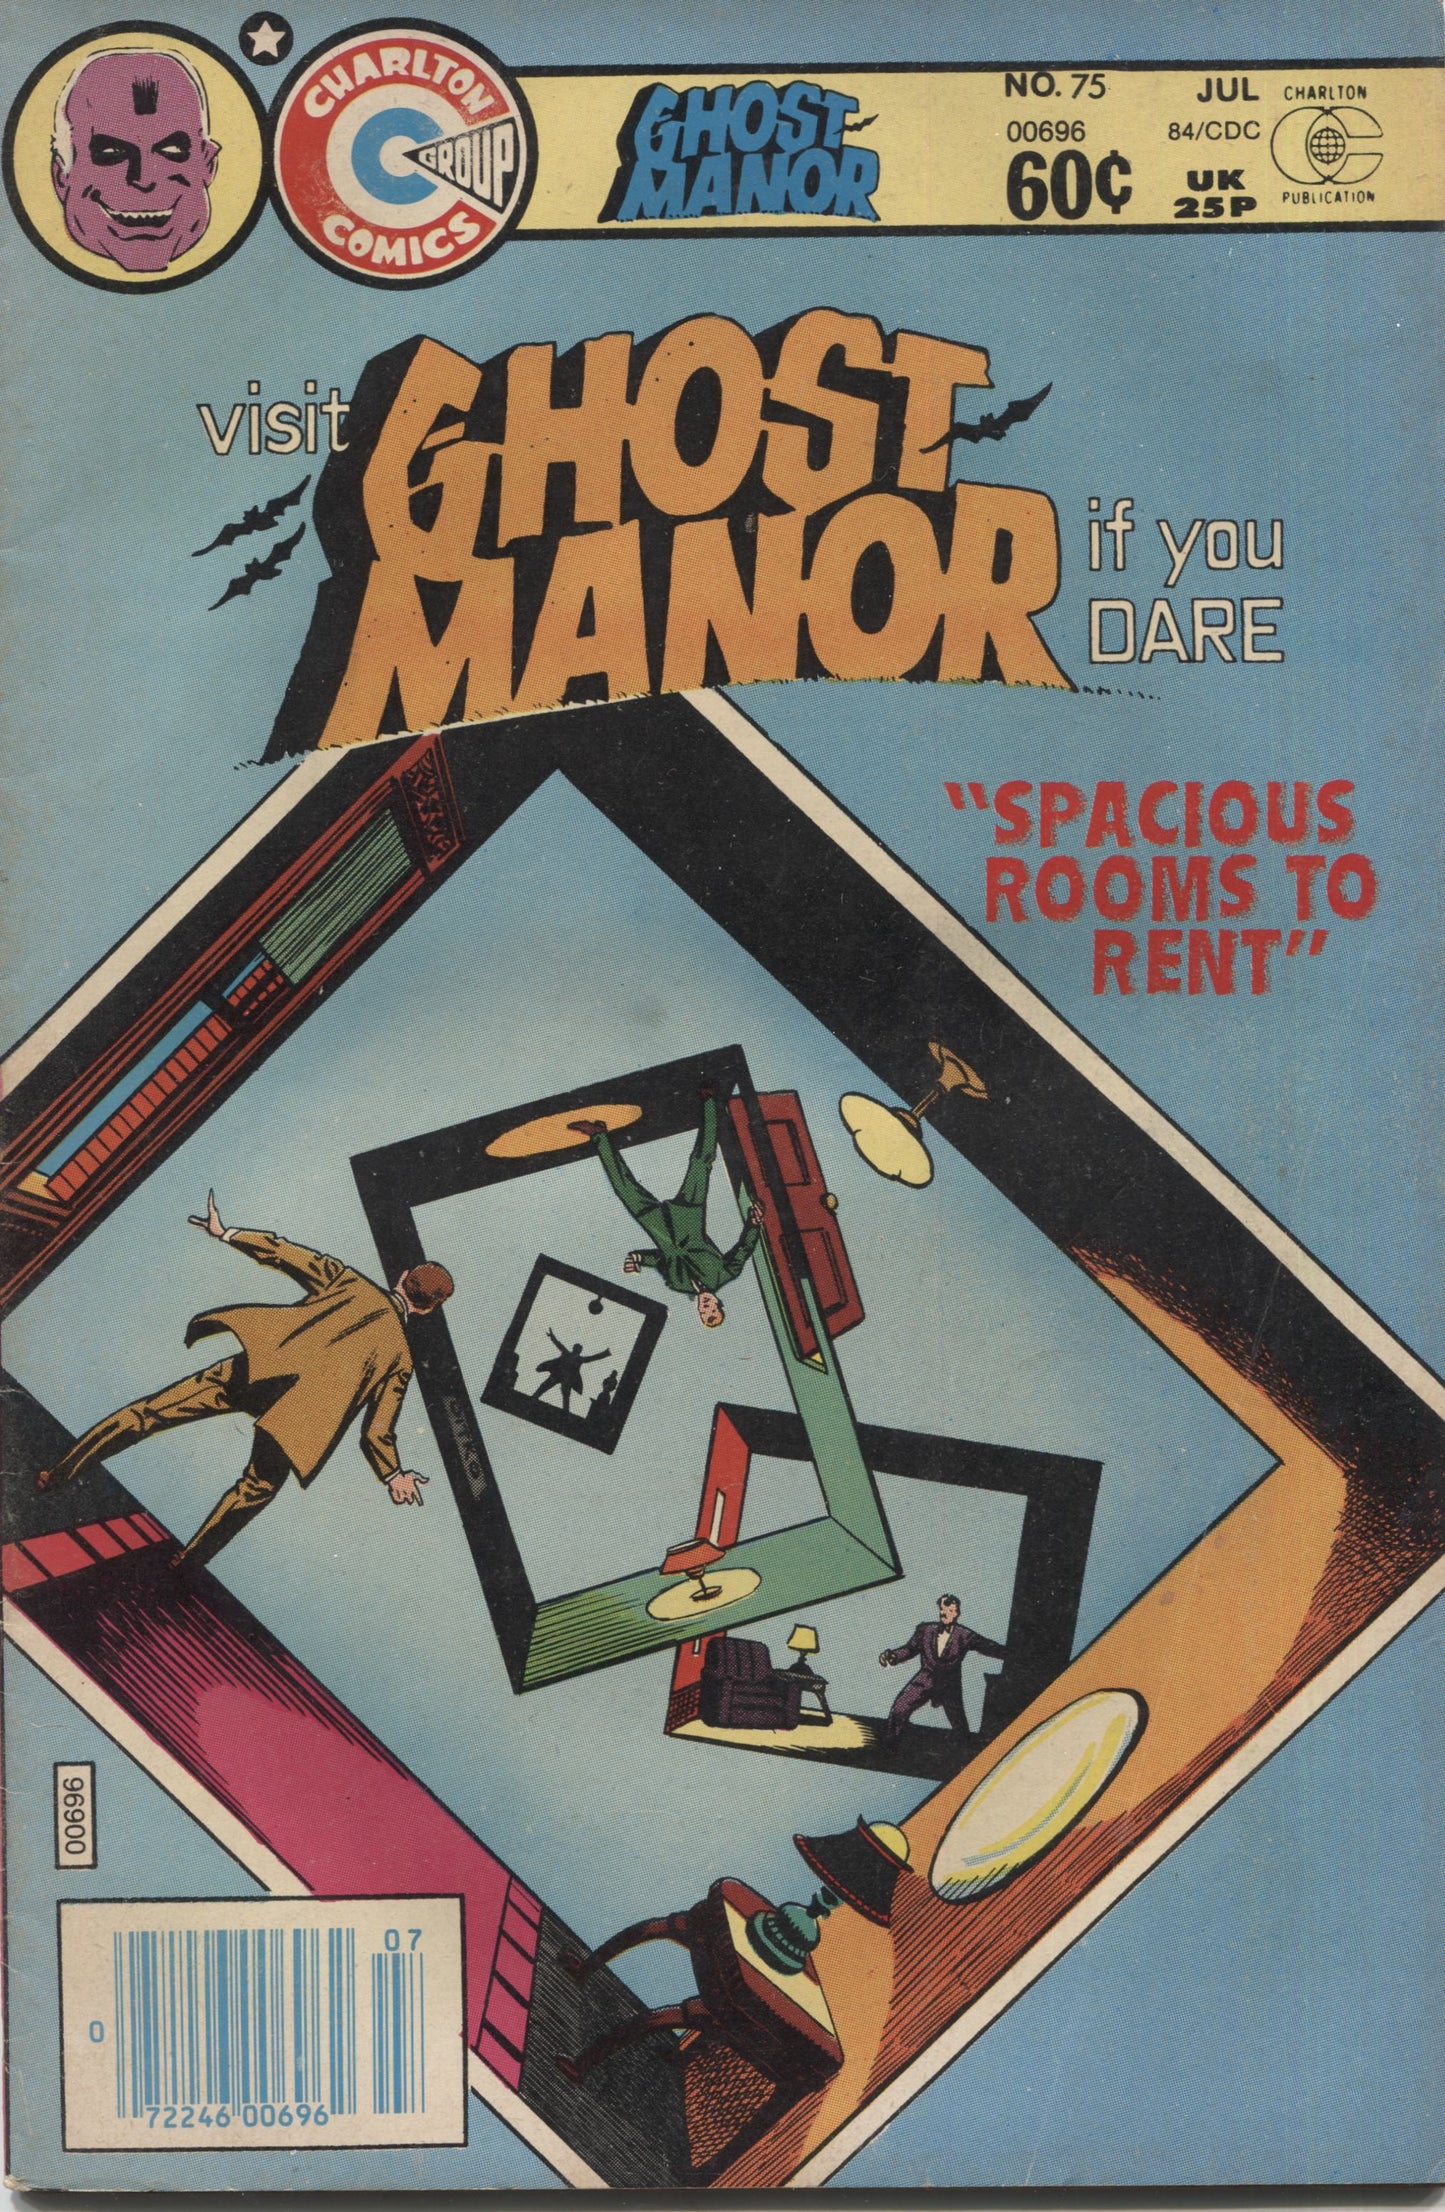 Ghost Manor No. 75, "Spacious Rooms to Rent," Charlton Comics, July 1984